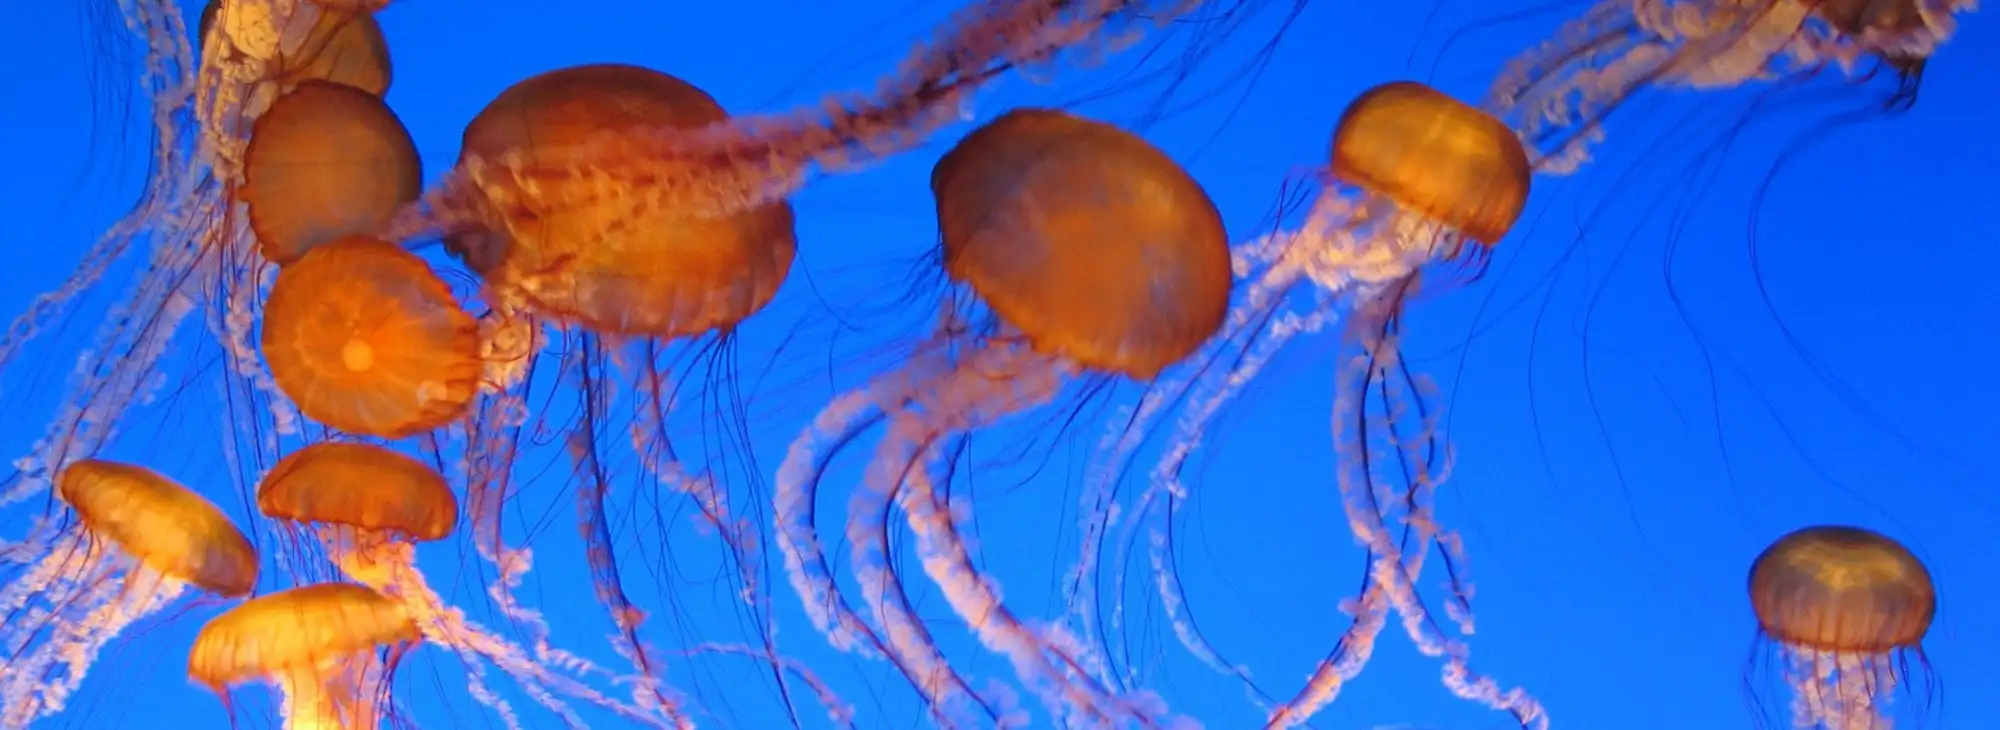 banner image of jelly fish